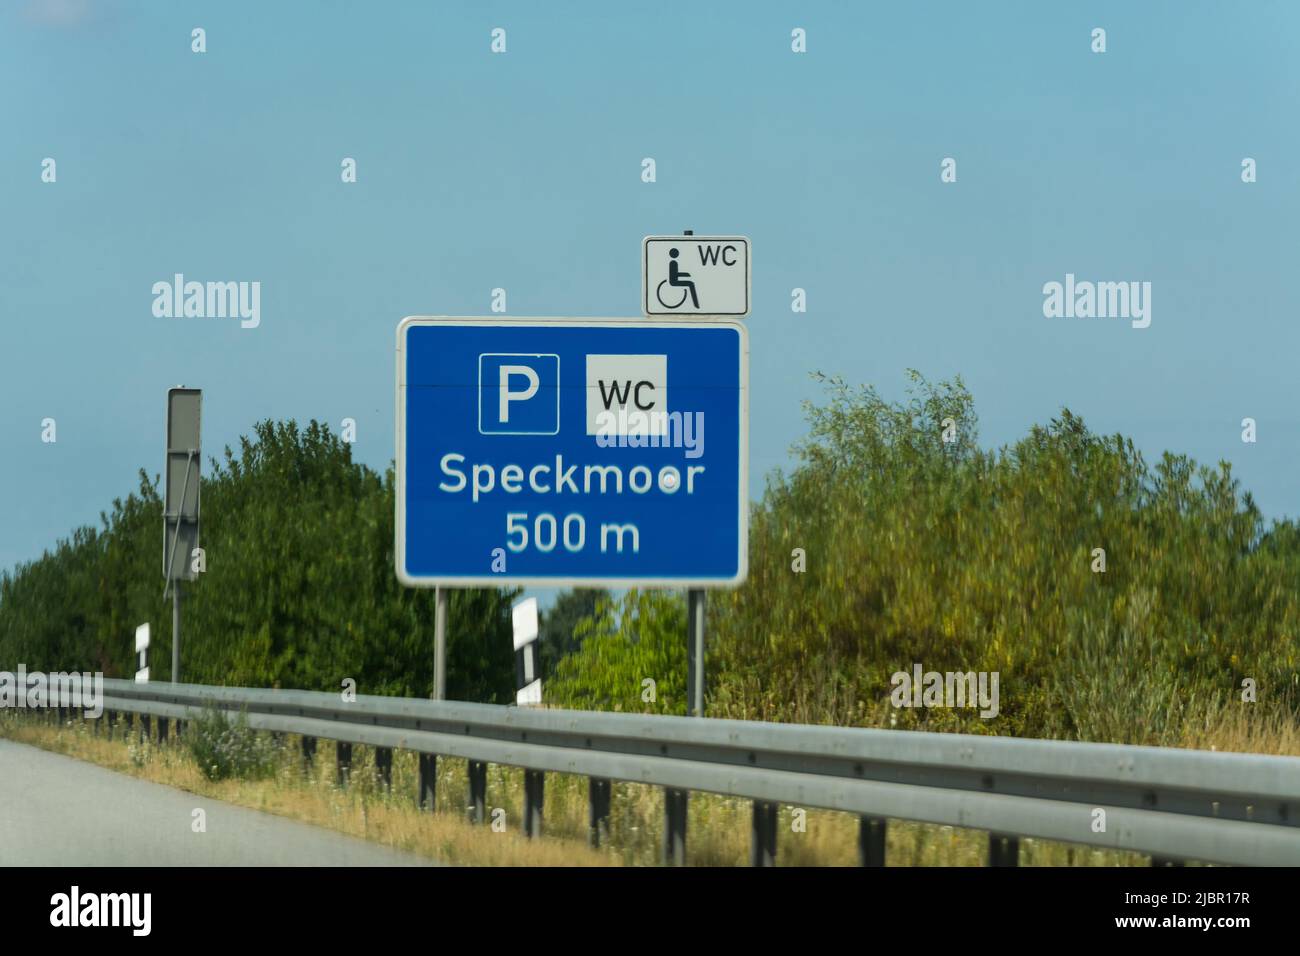 Autobahn sign in Germany Caption on German - city names Speckmoor Stock  Photo - Alamy